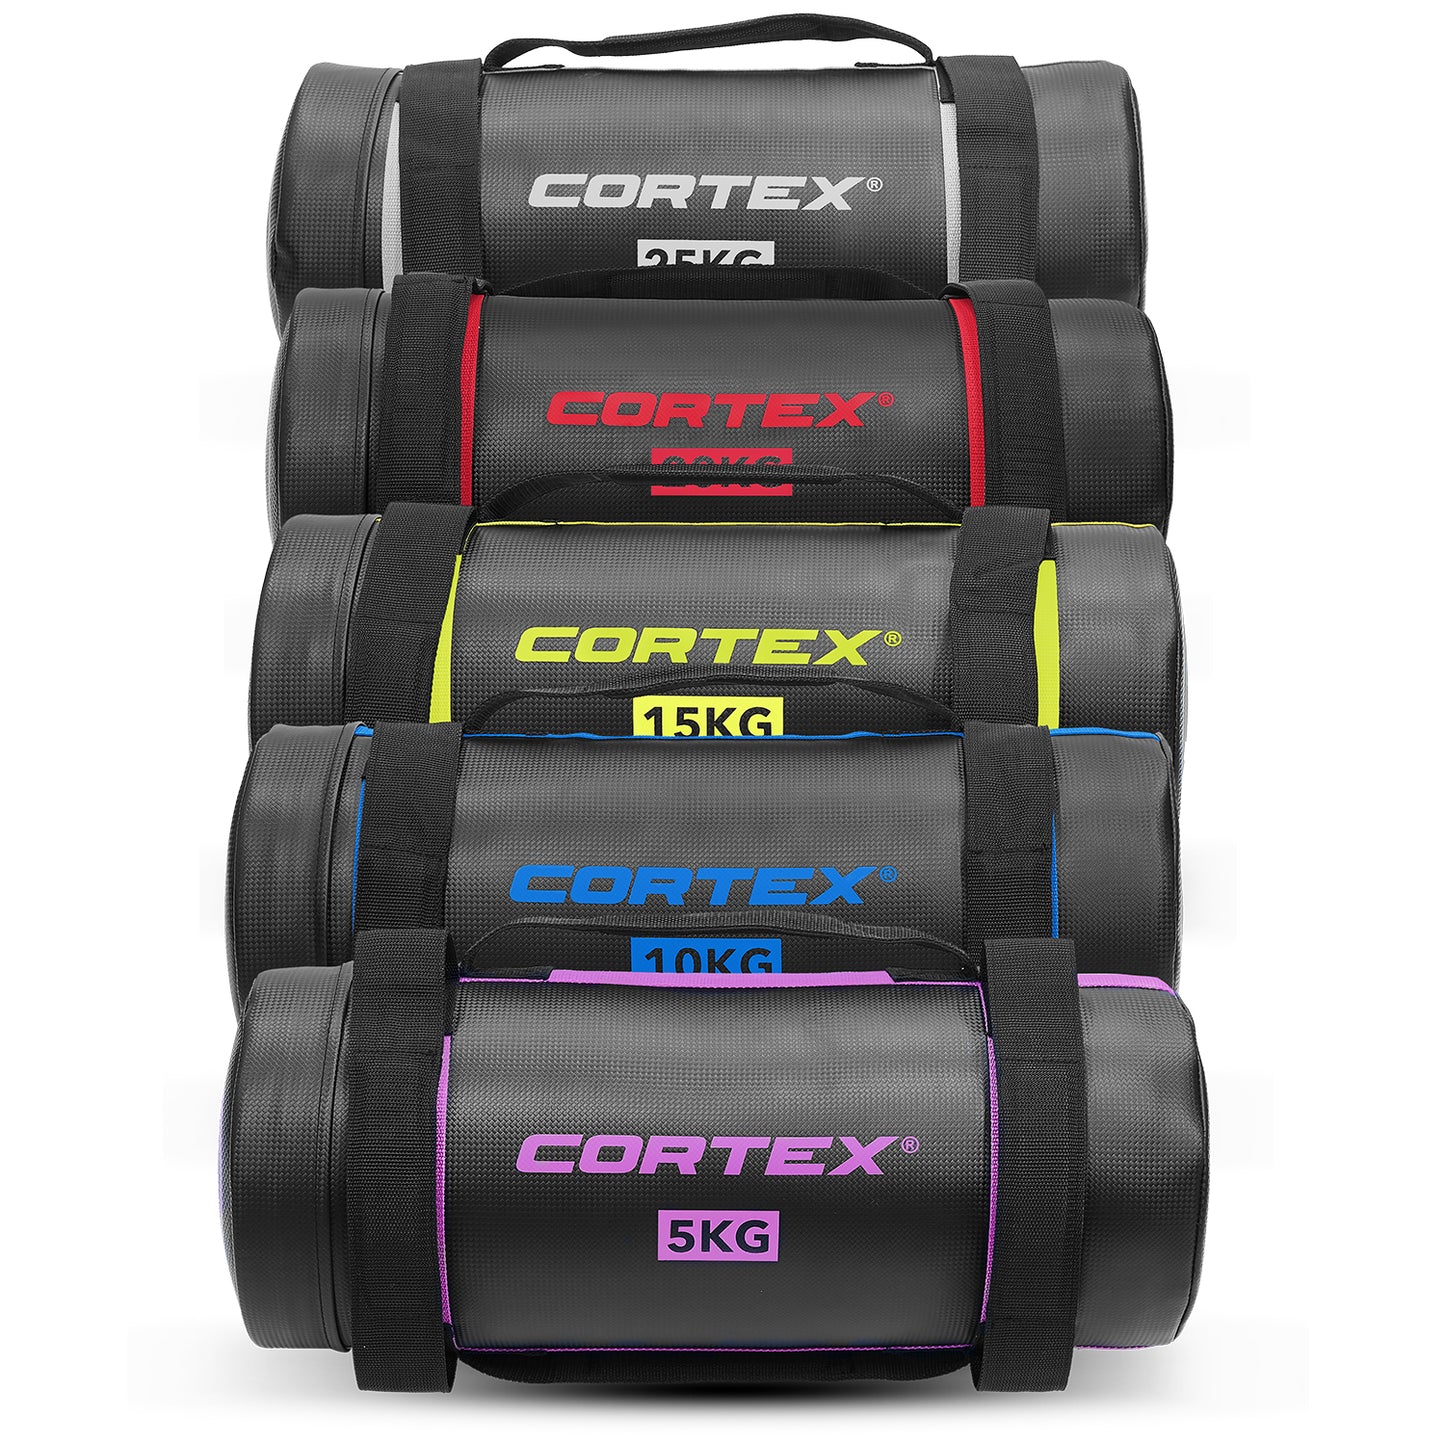 CORTEX 75kg Power Bag Complete Set with Storage Stand